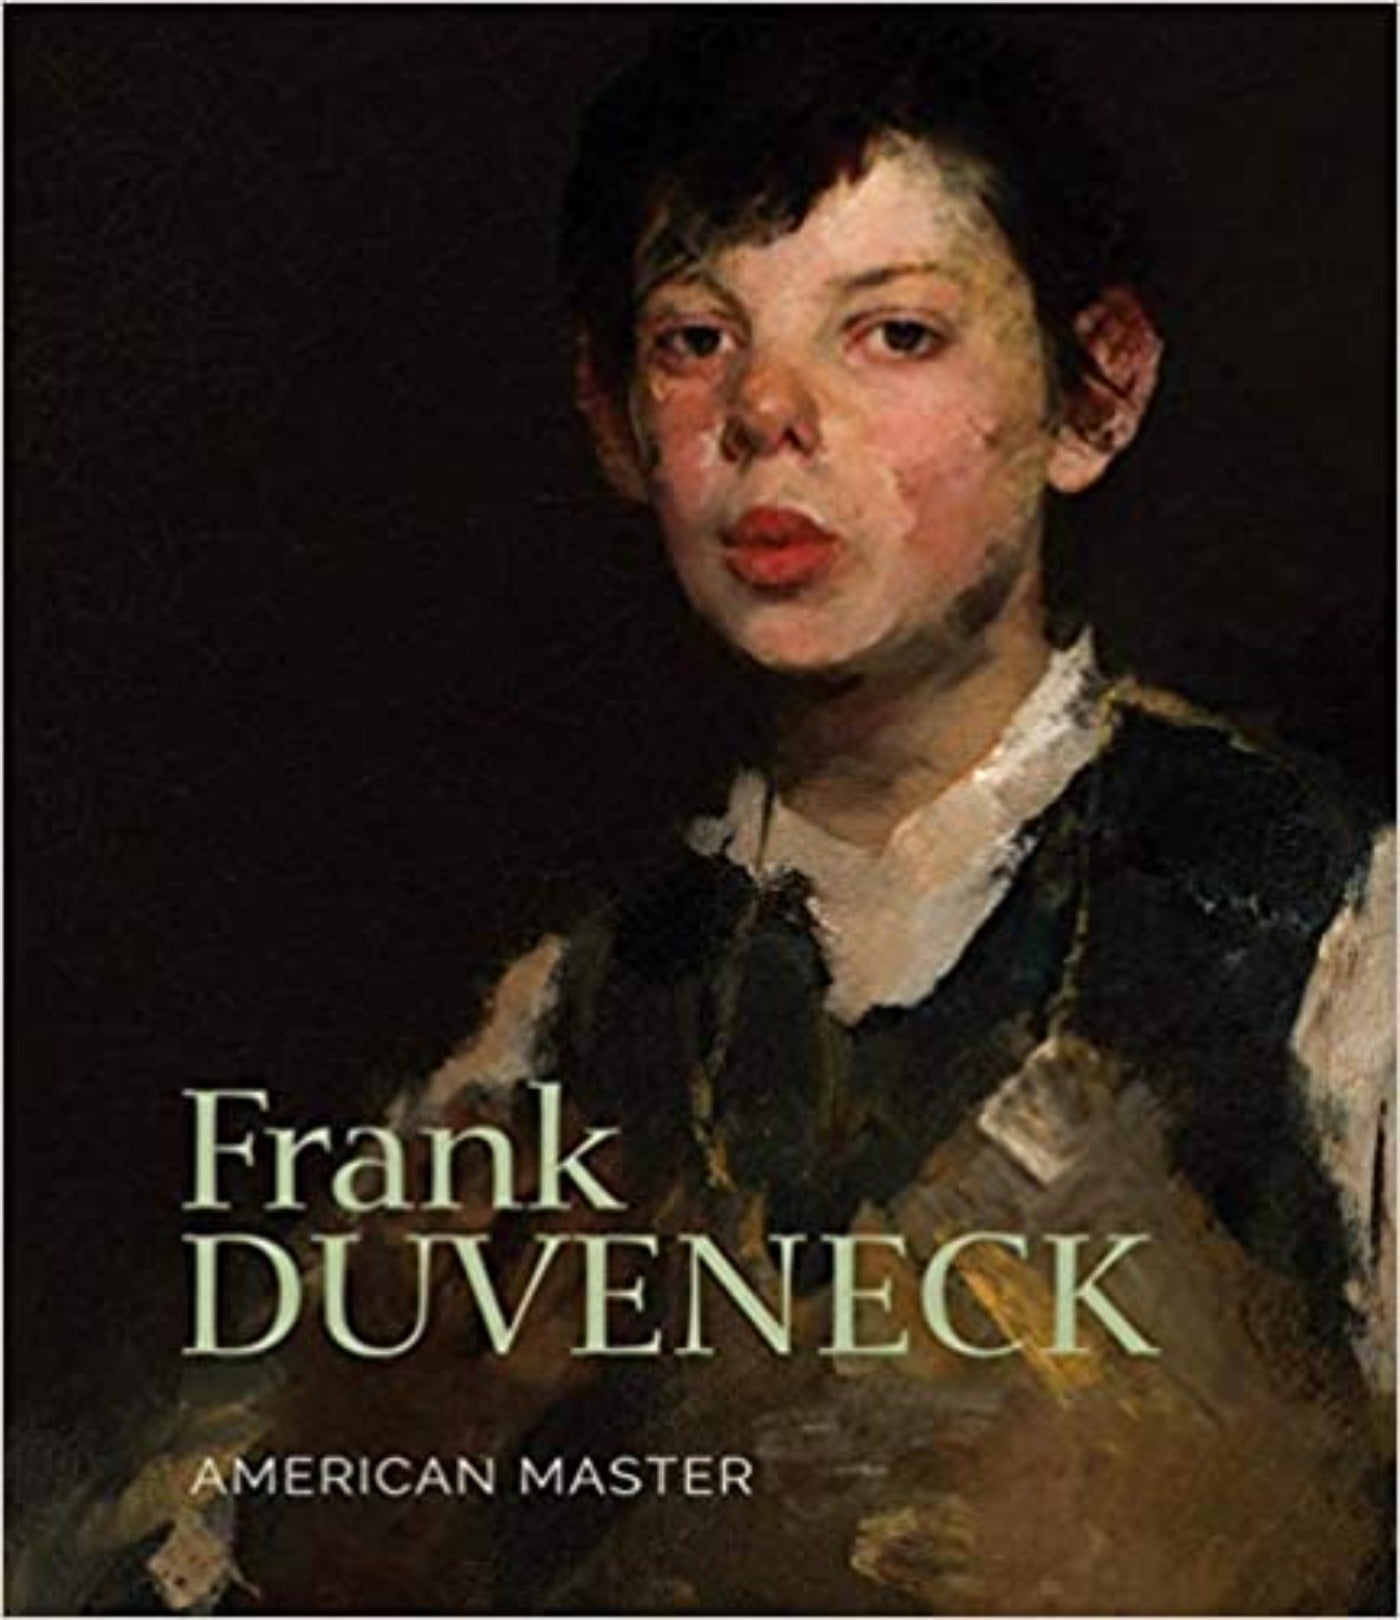 Image of Frank Duveneck book cover featuring the whistling boy